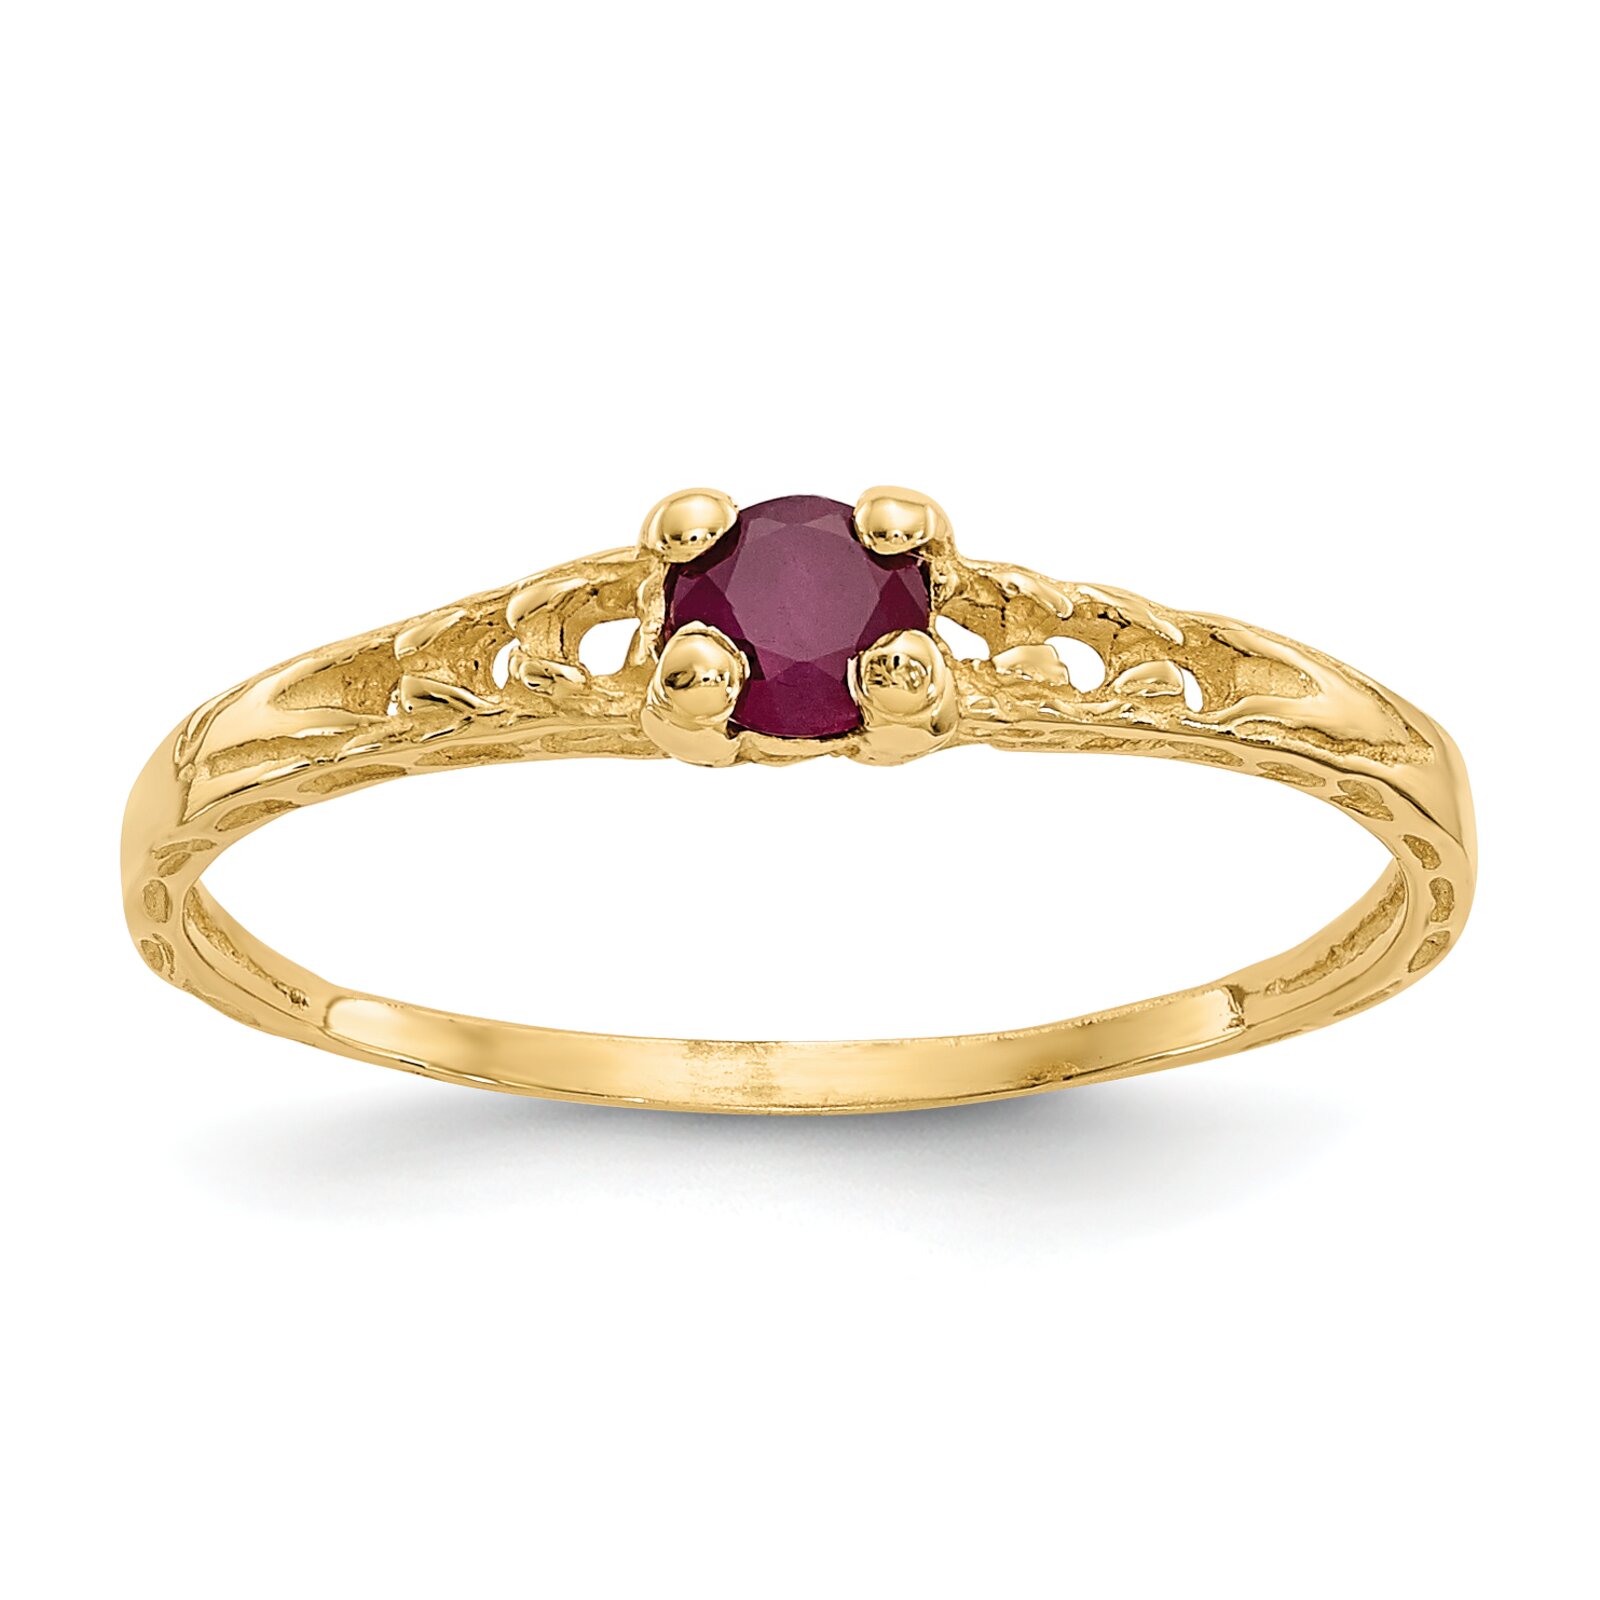 Findingking 14K Gold Ruby July Birthstone Childrens Ring Jewelry